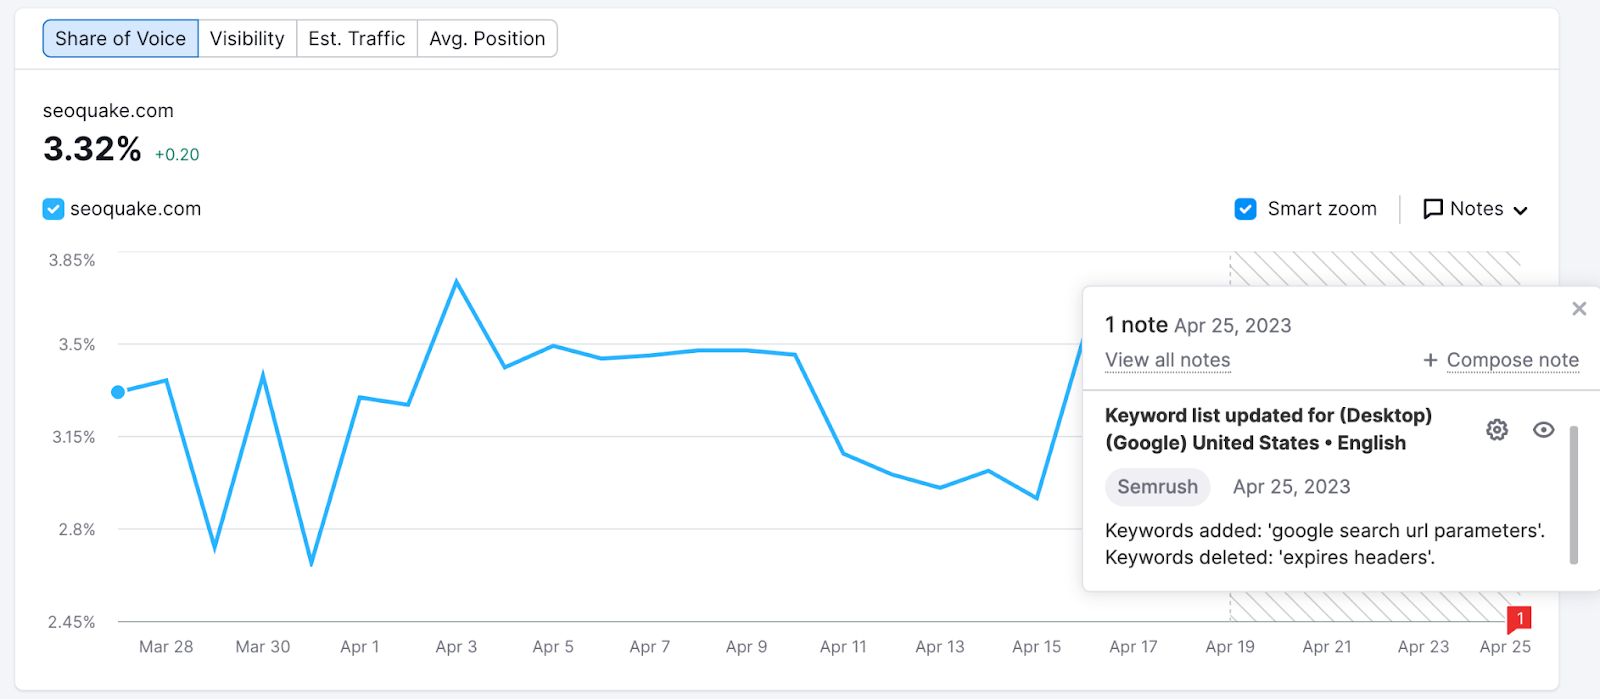 A screenshot of the trend chart from Position Tracking Overview with a note about added/deleted keywords.